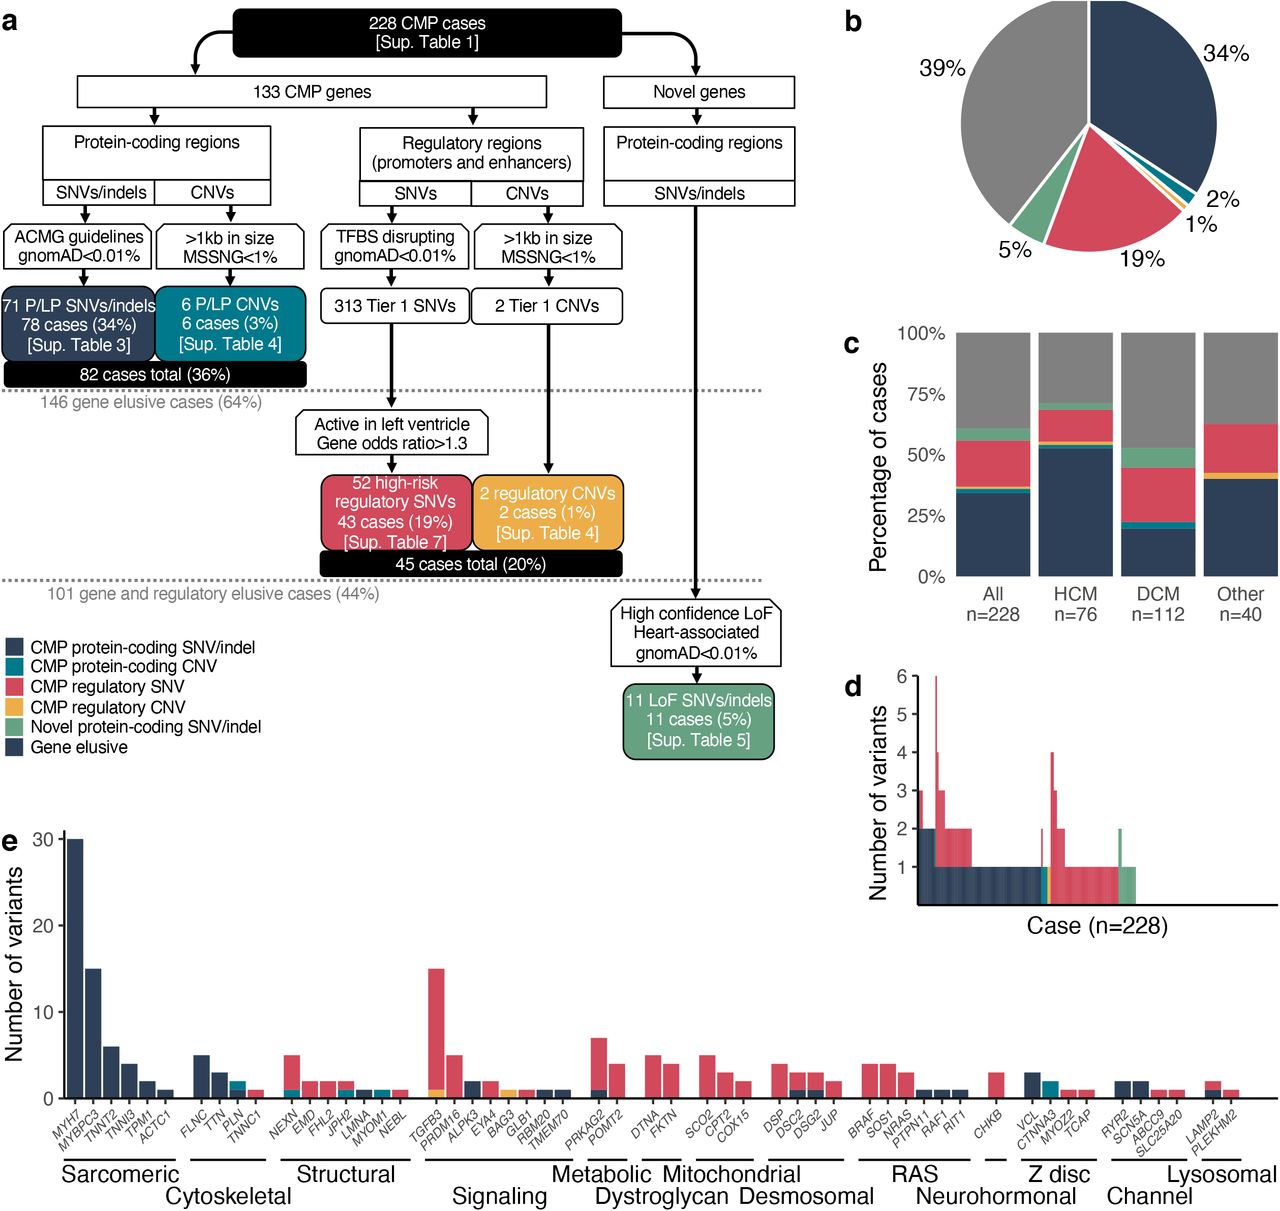 Full article: Complete genome sequencing of exopolysaccharide